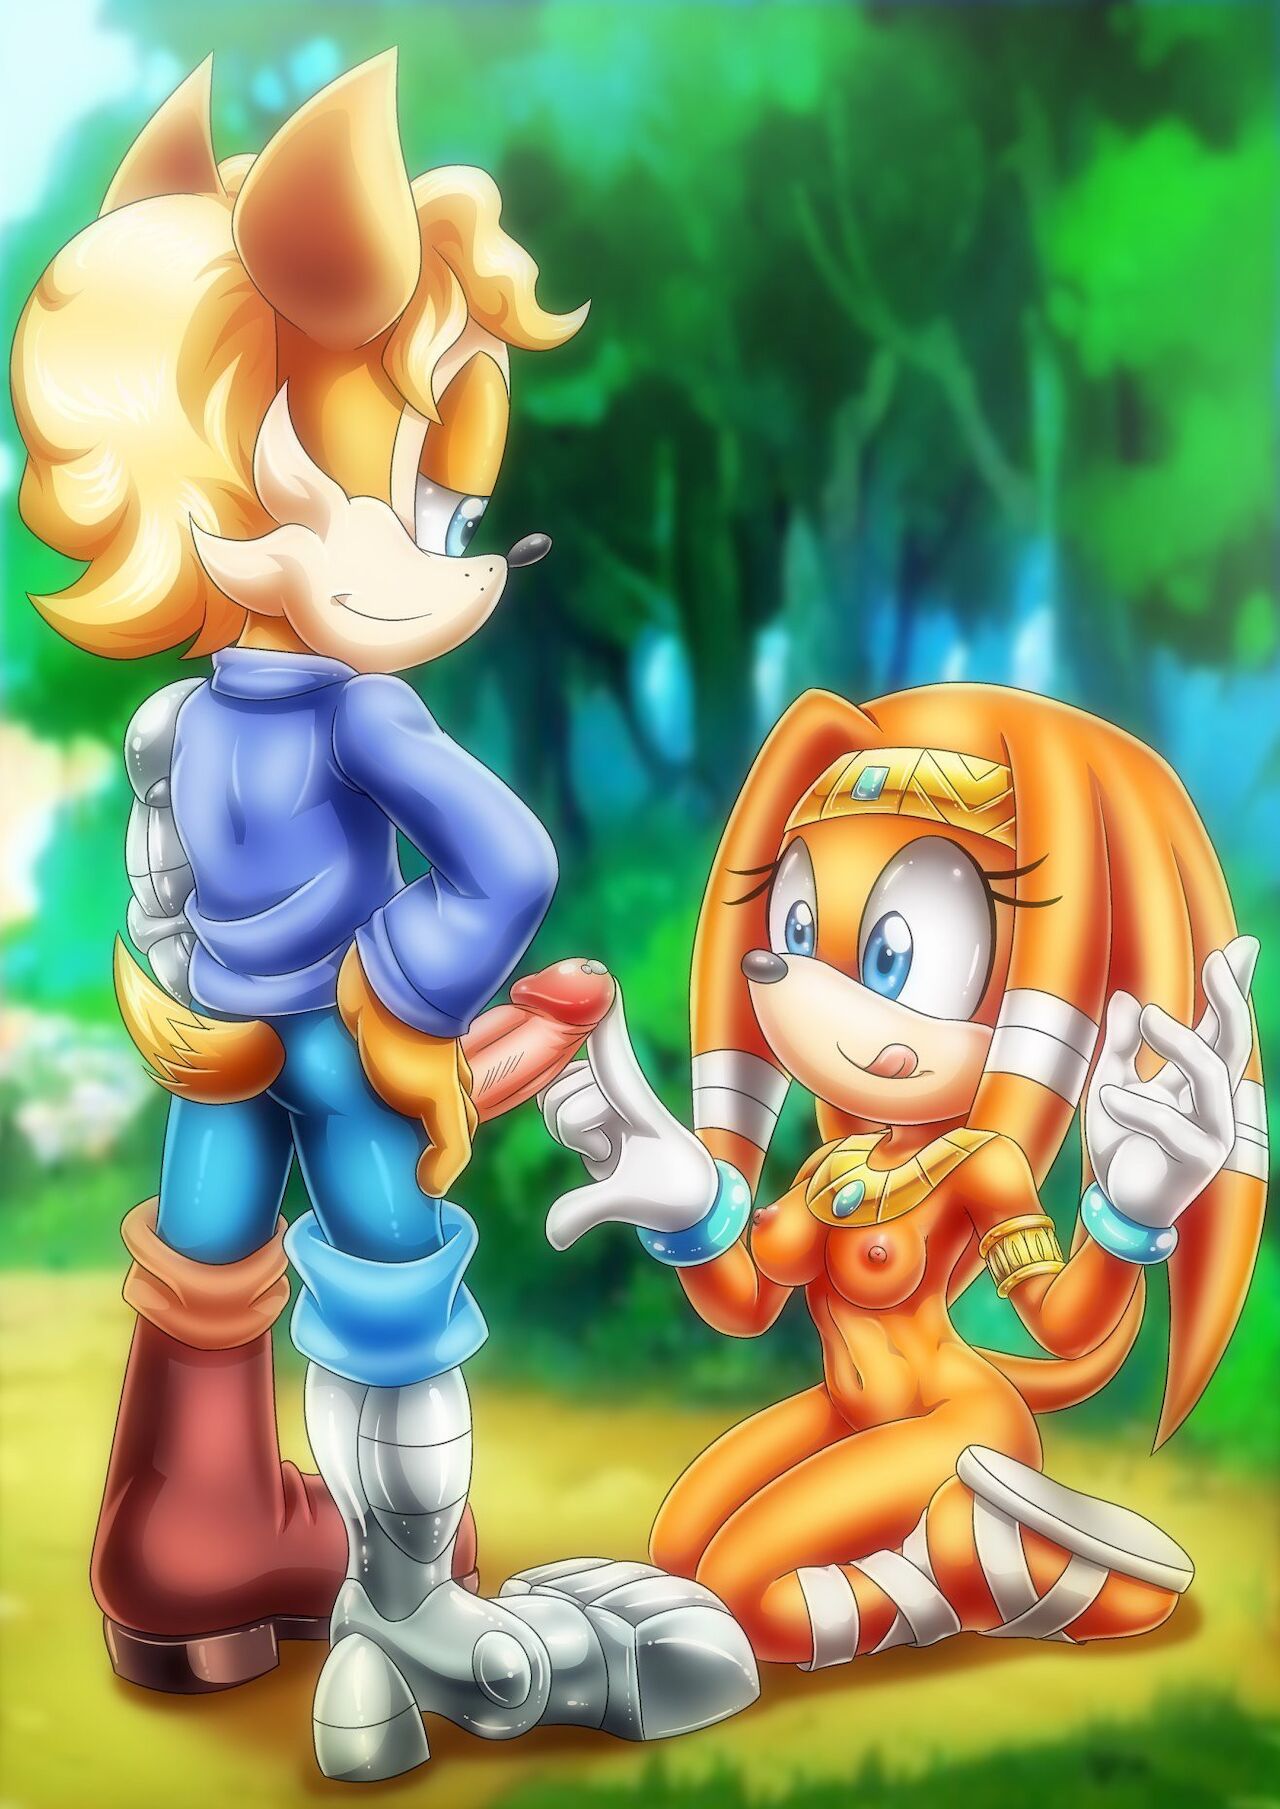 Mobius Unleashed: Tikal the Echidna 36